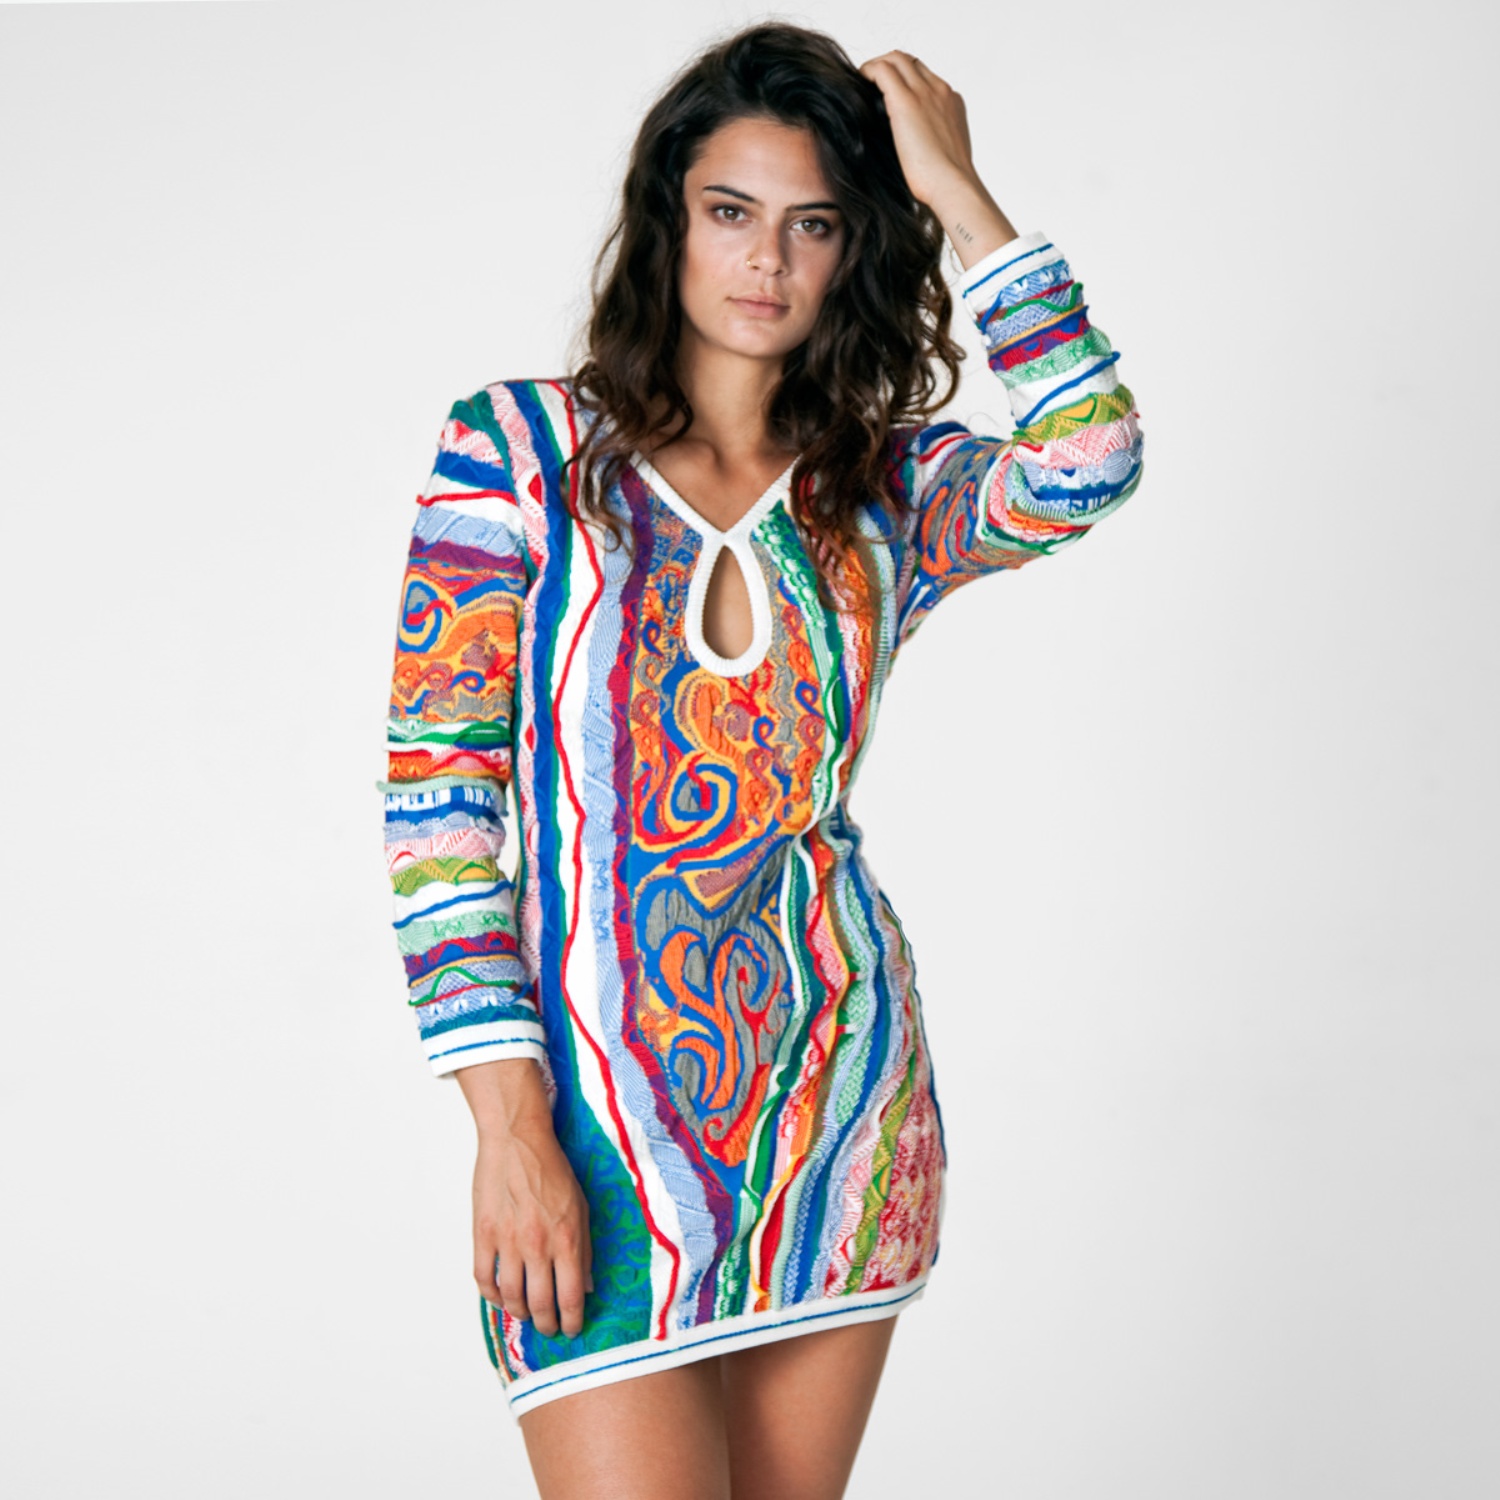 Coogi ready to hypnotize with two sexy knit dresses for fall 20171500 x 1500